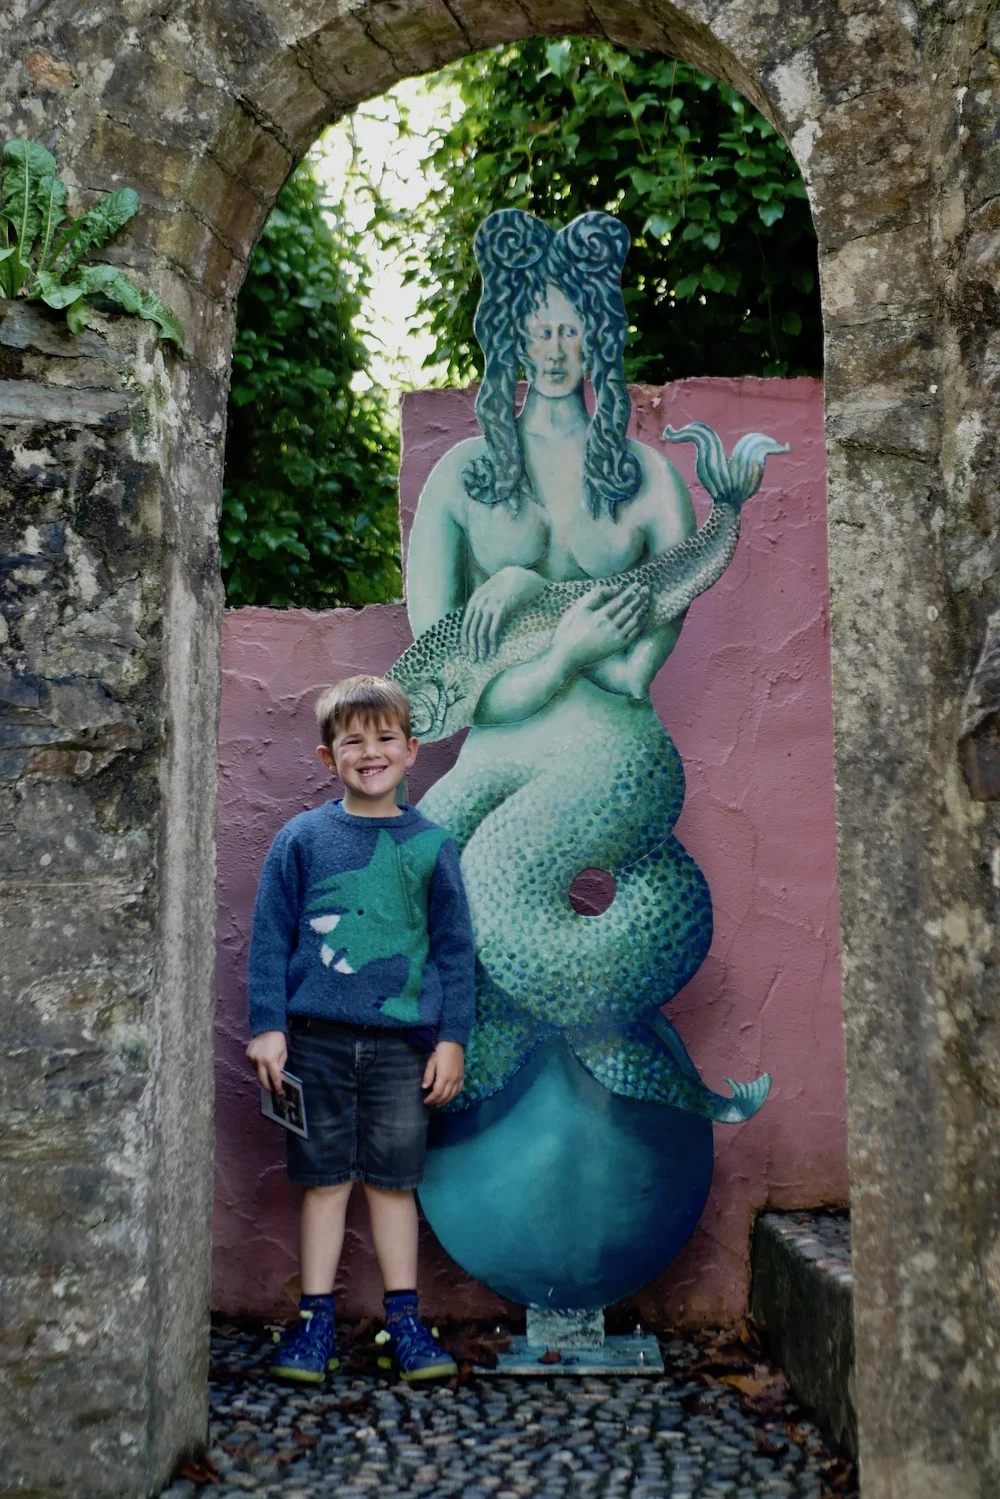 Always searching for Mermaids in Portmeirion